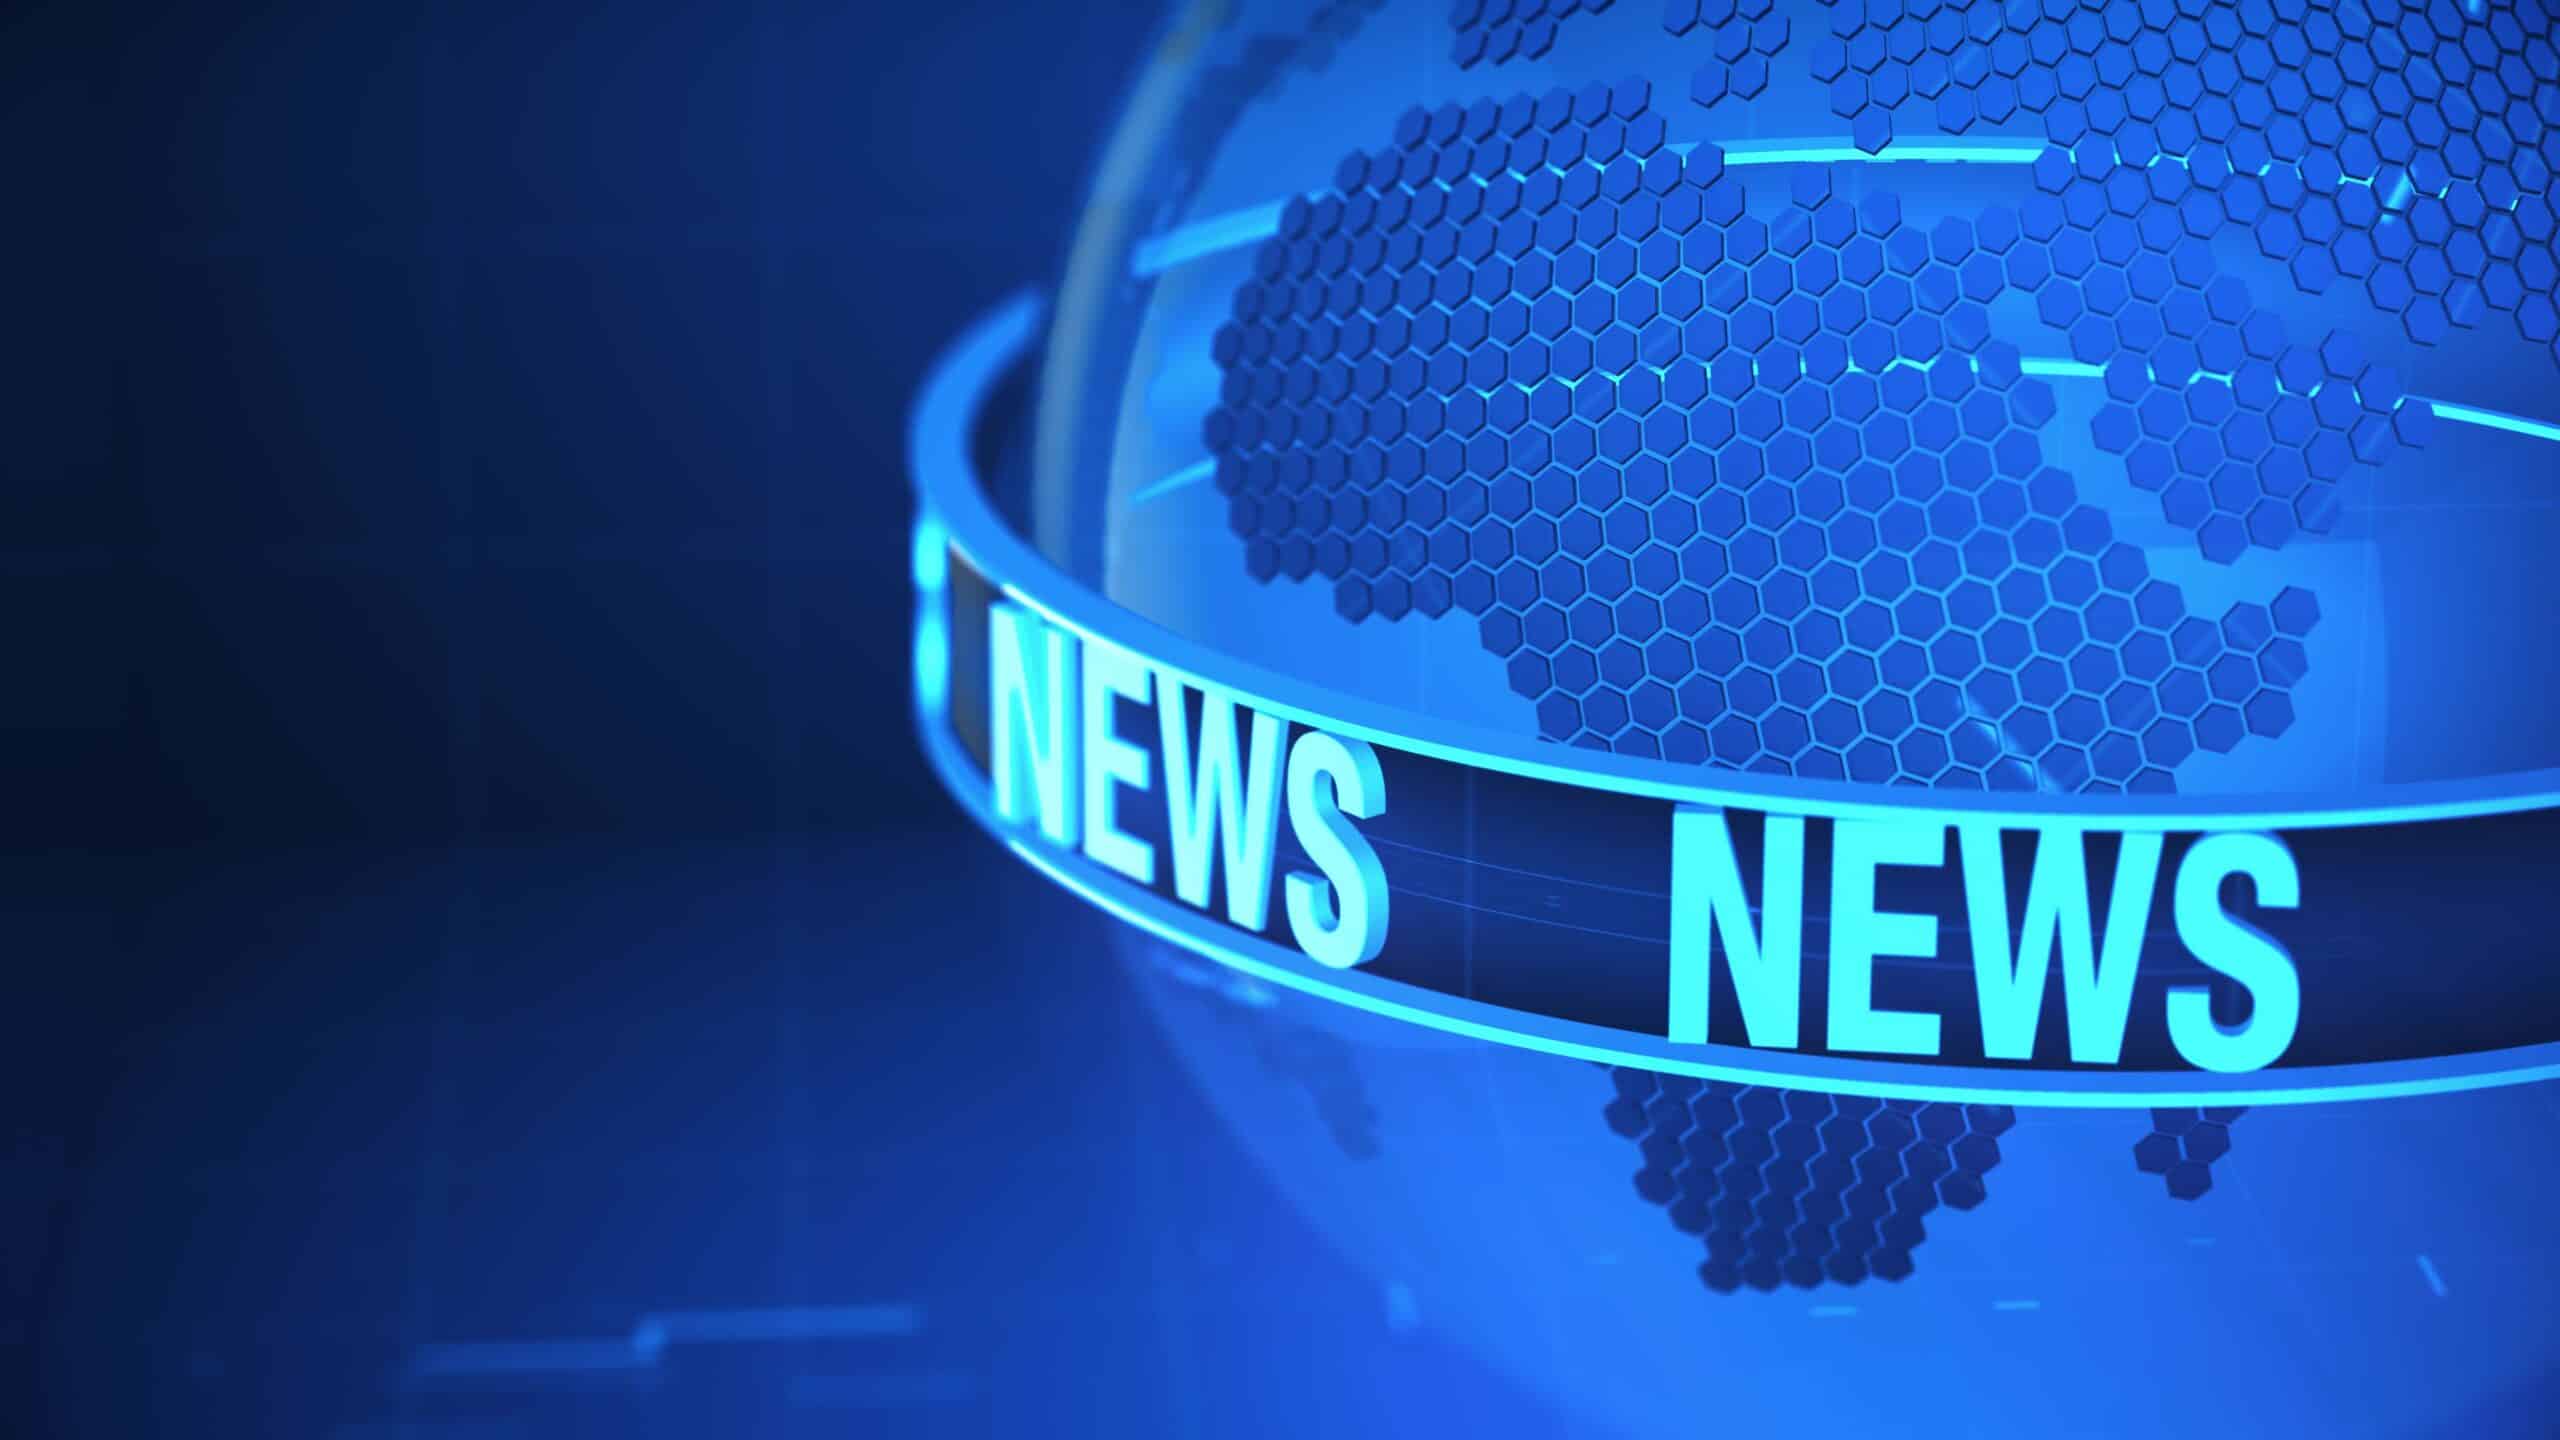 Iharare News: A Trusted Source for Zimbabwean News and Information